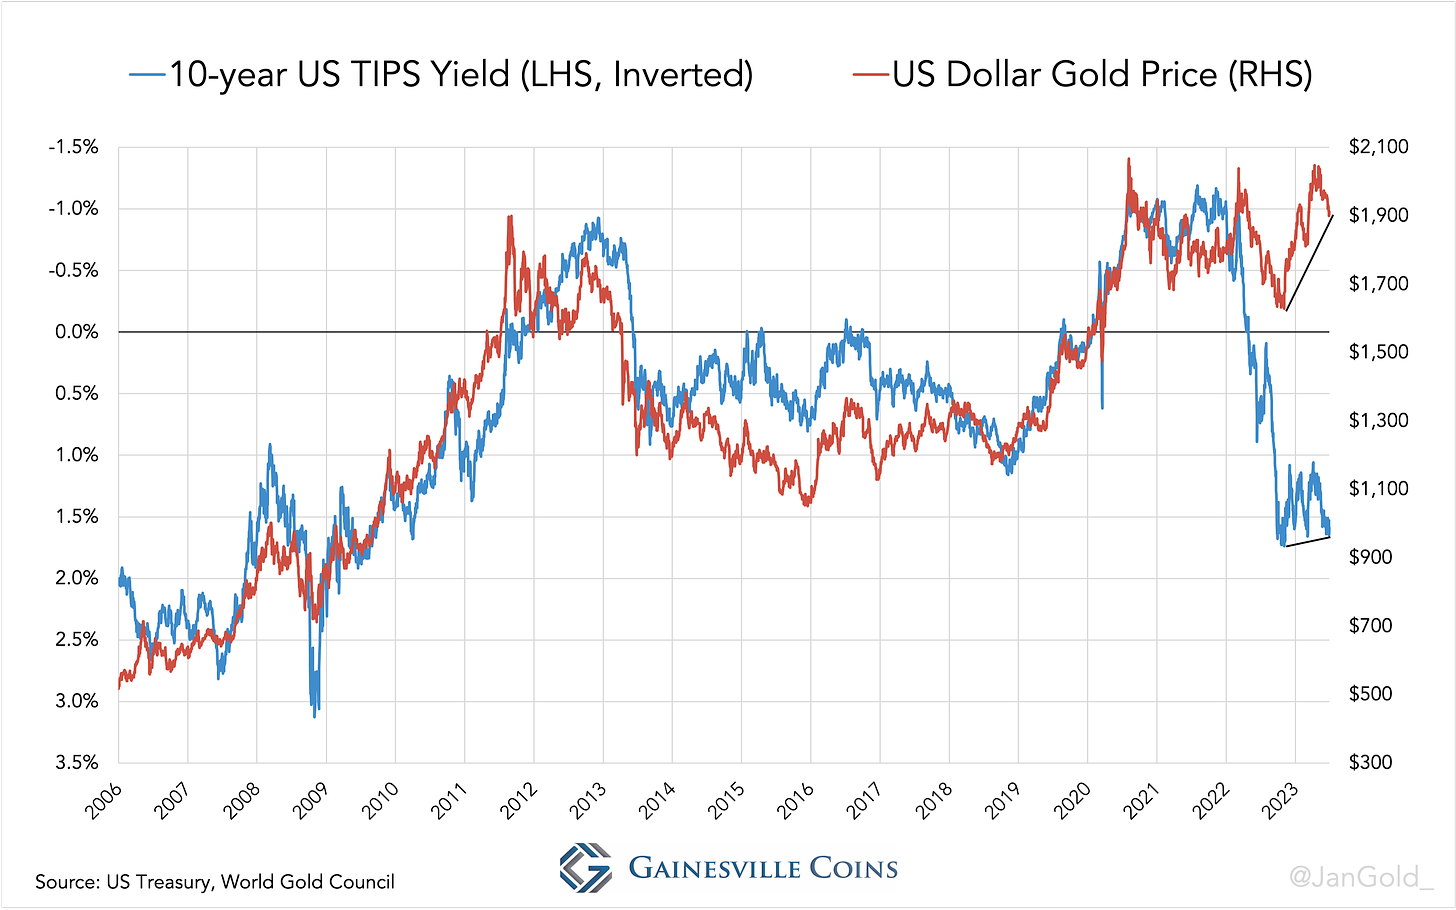 chart showing 10-year TIPS yield vs. gold price since 2006